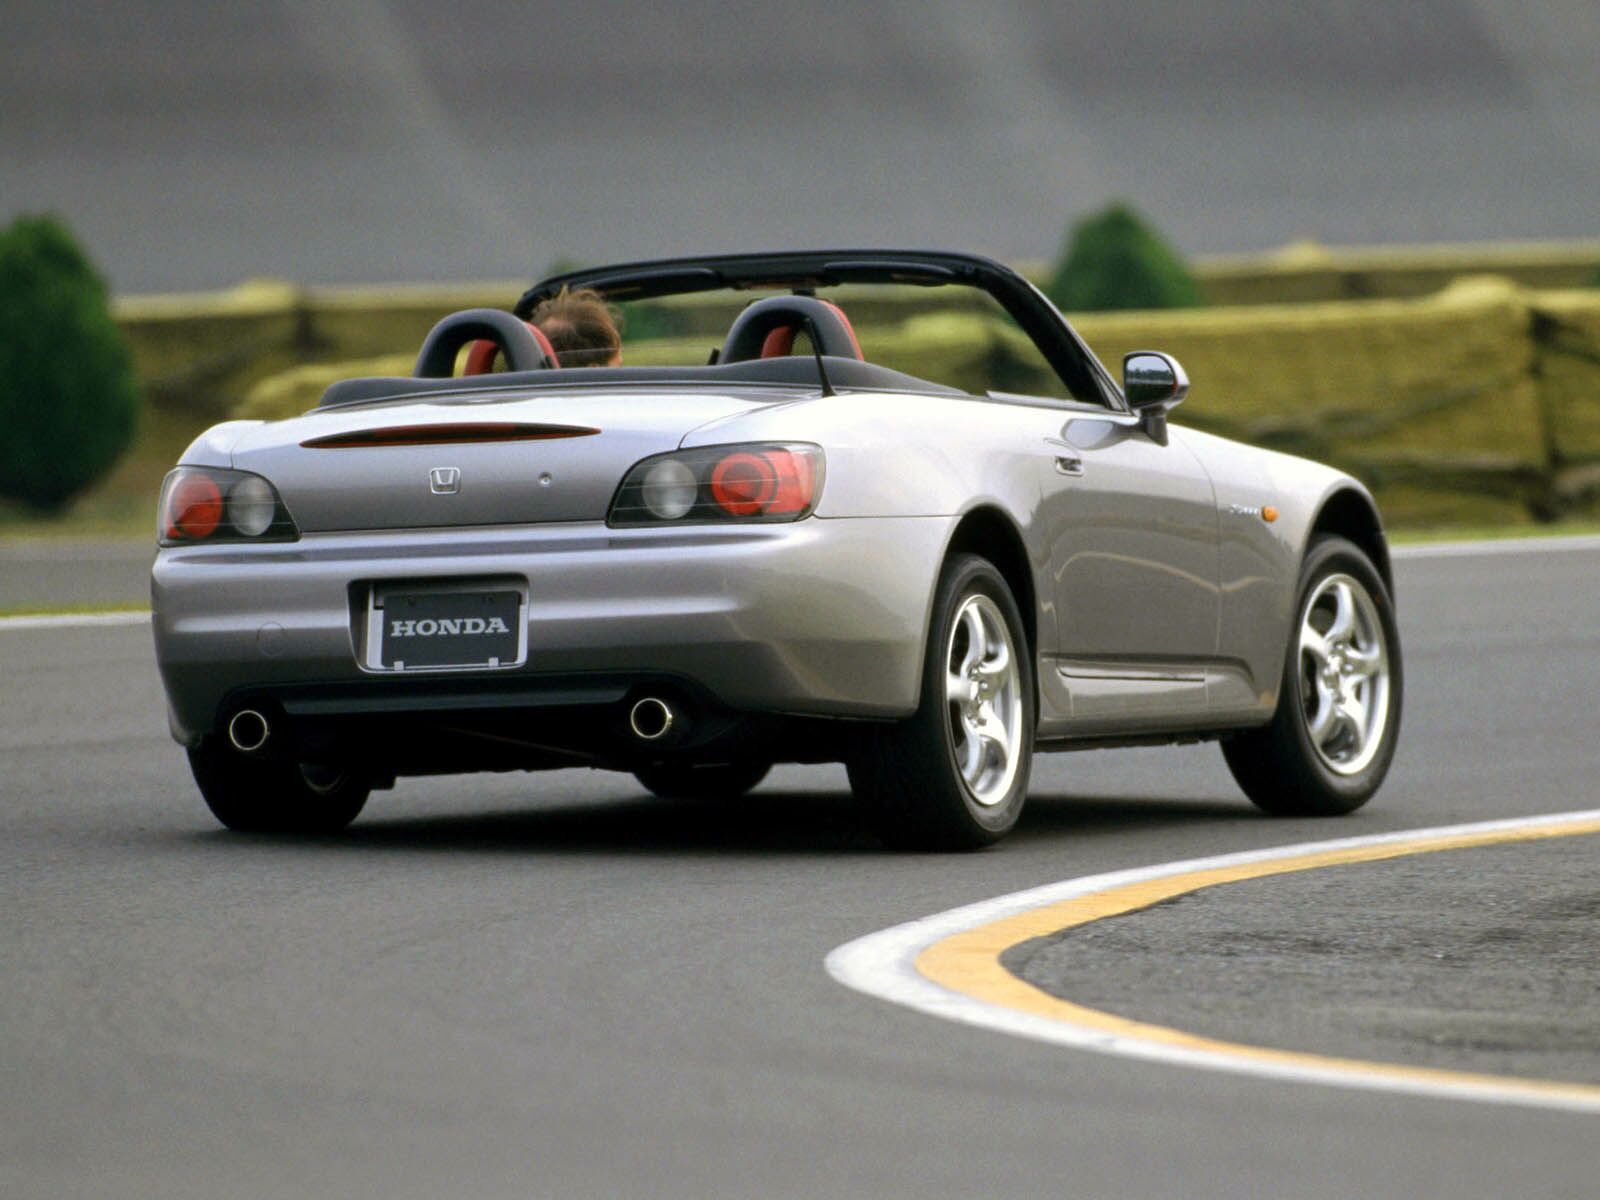 Honda s2000 picture gallery #2